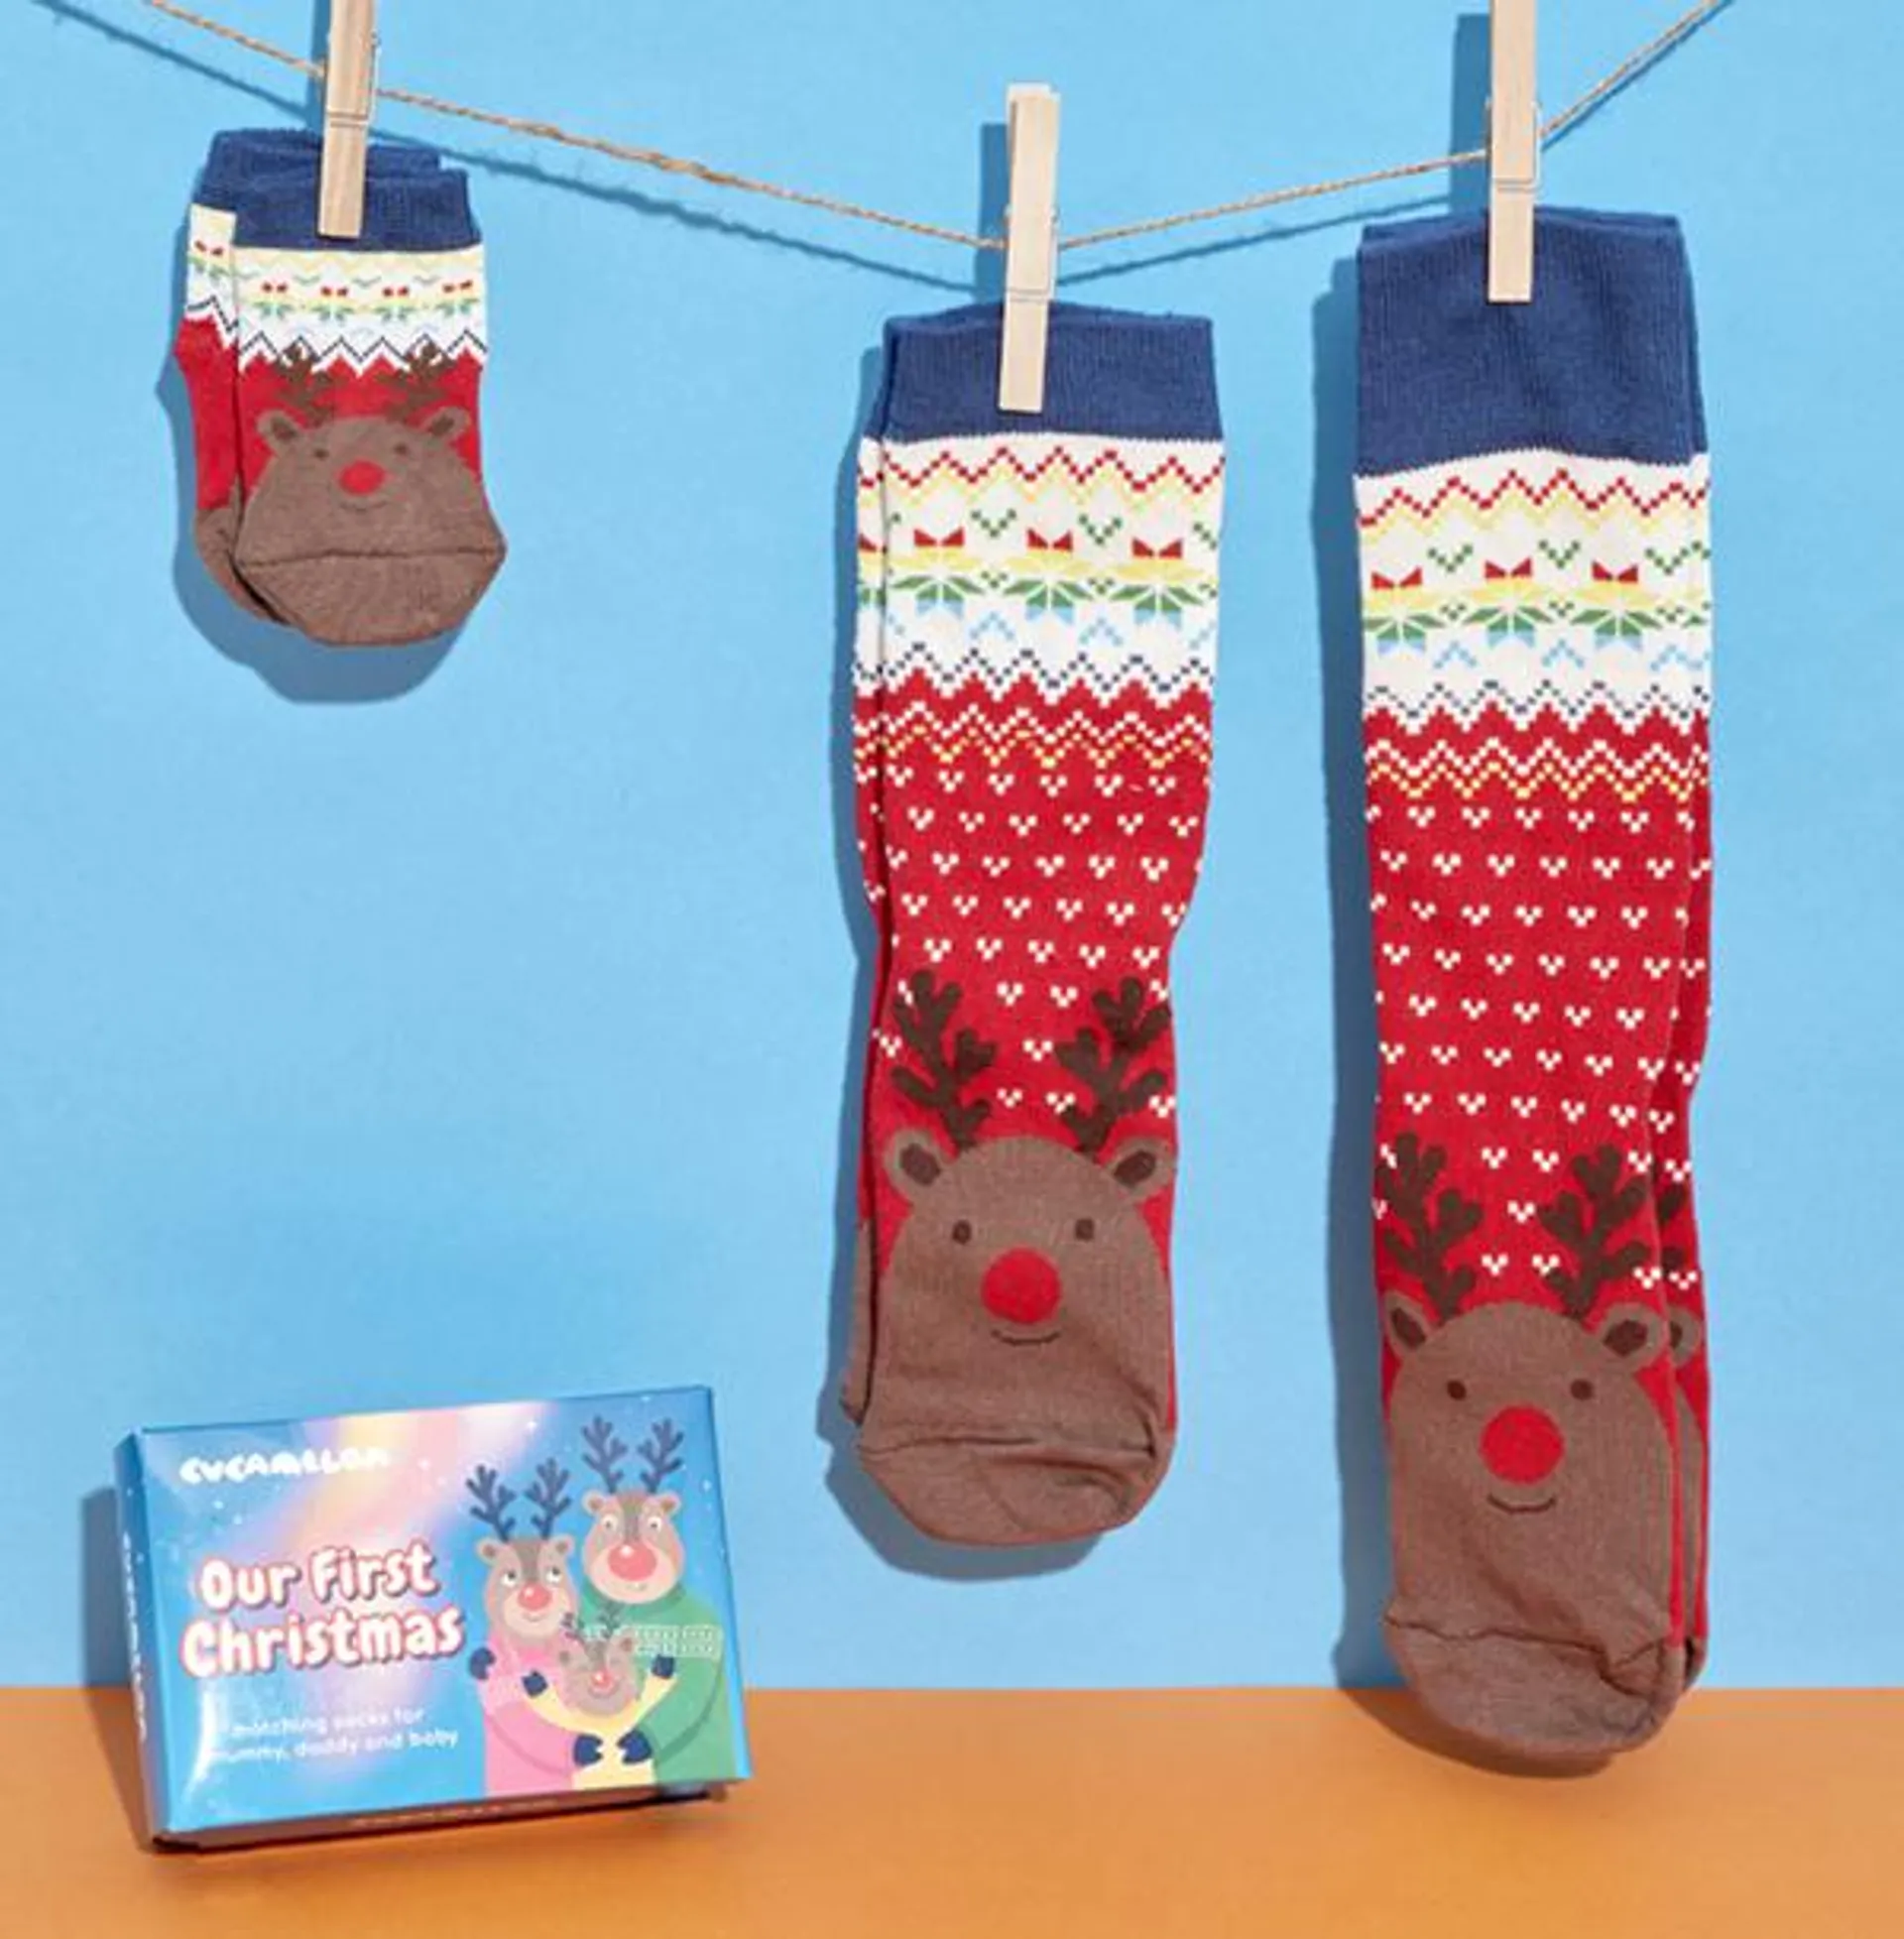 Our First Christmas - Mummy, Daddy & Me Socks WAS £14.99 NOW £6.99